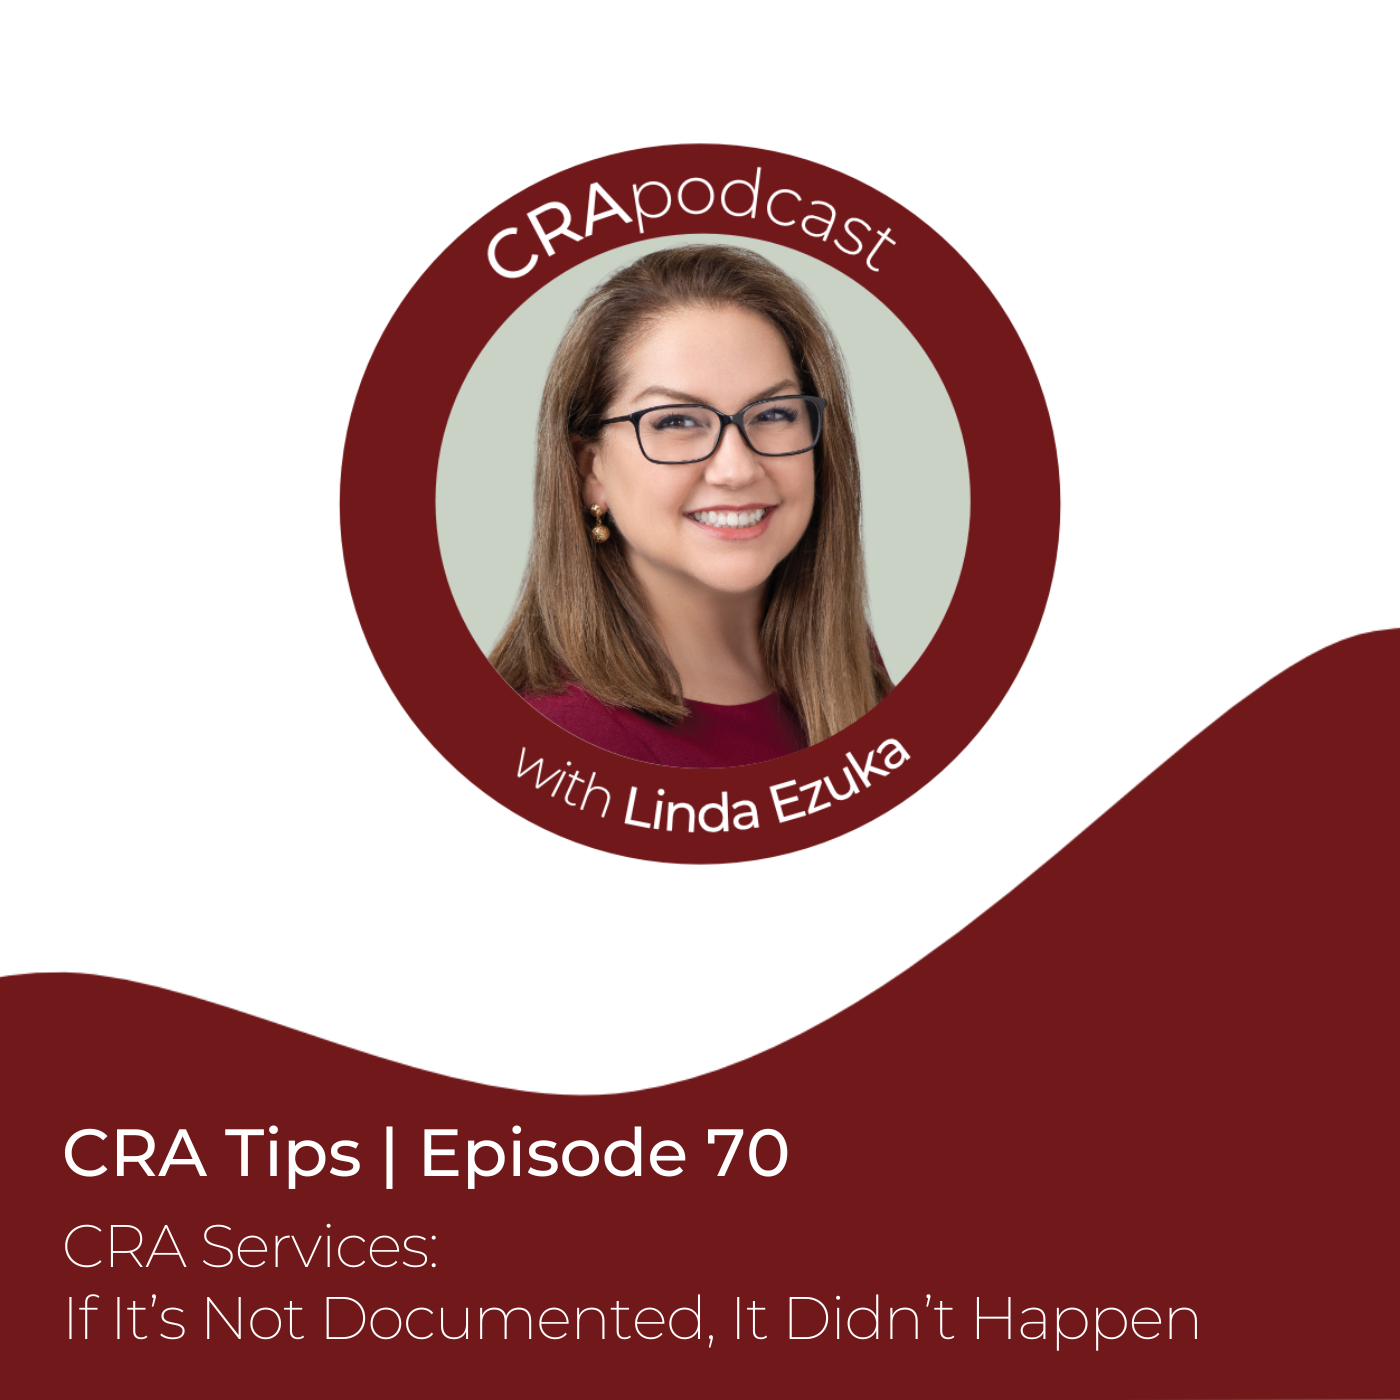 Episode 70: CRA Services: If It’s Not Documented, It Didn’t Happen